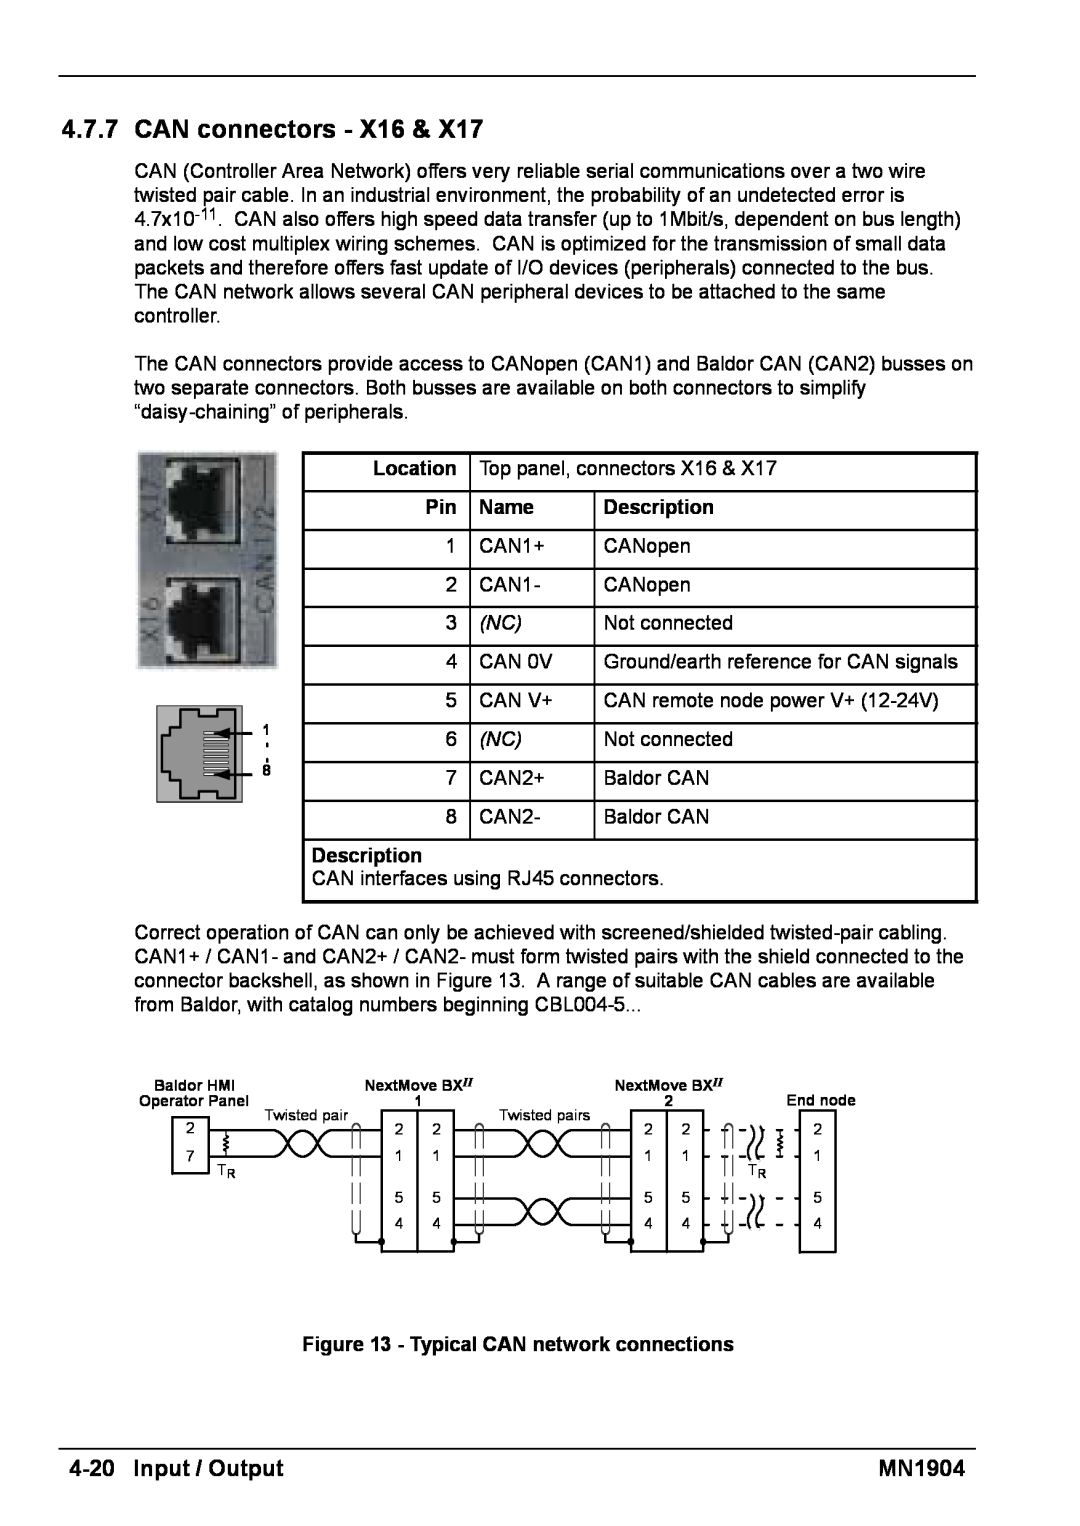 Baldor BXII installation manual CAN connectors, 4-20Input / Output, MN1904 